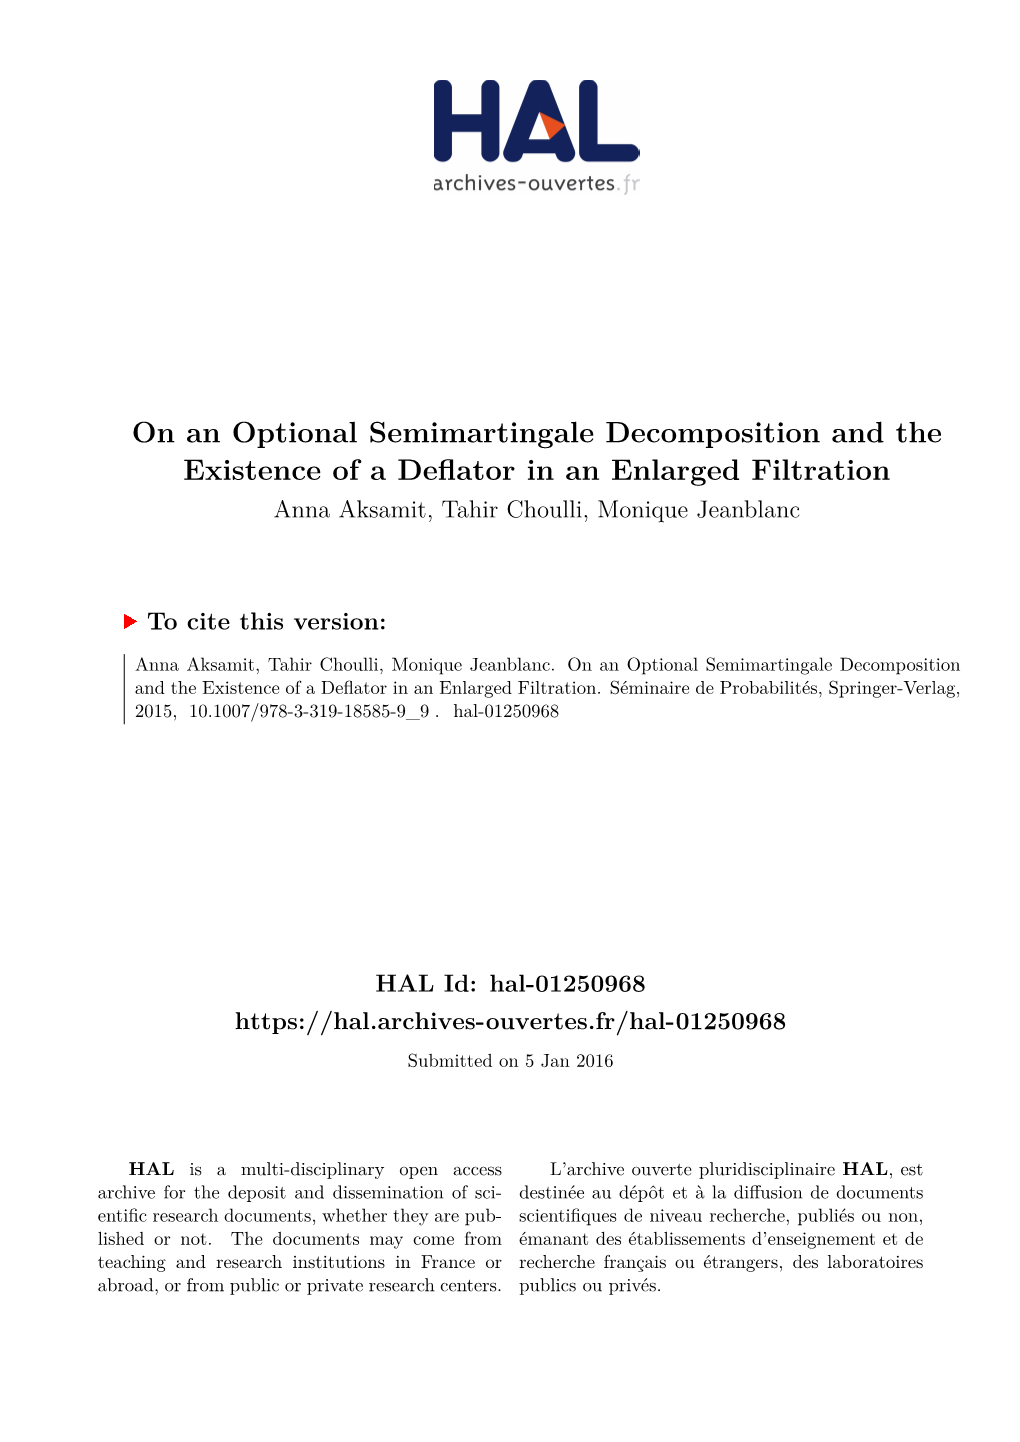 On an Optional Semimartingale Decomposition and the Existence of a Deflator in an Enlarged Filtration Anna Aksamit, Tahir Choulli, Monique Jeanblanc